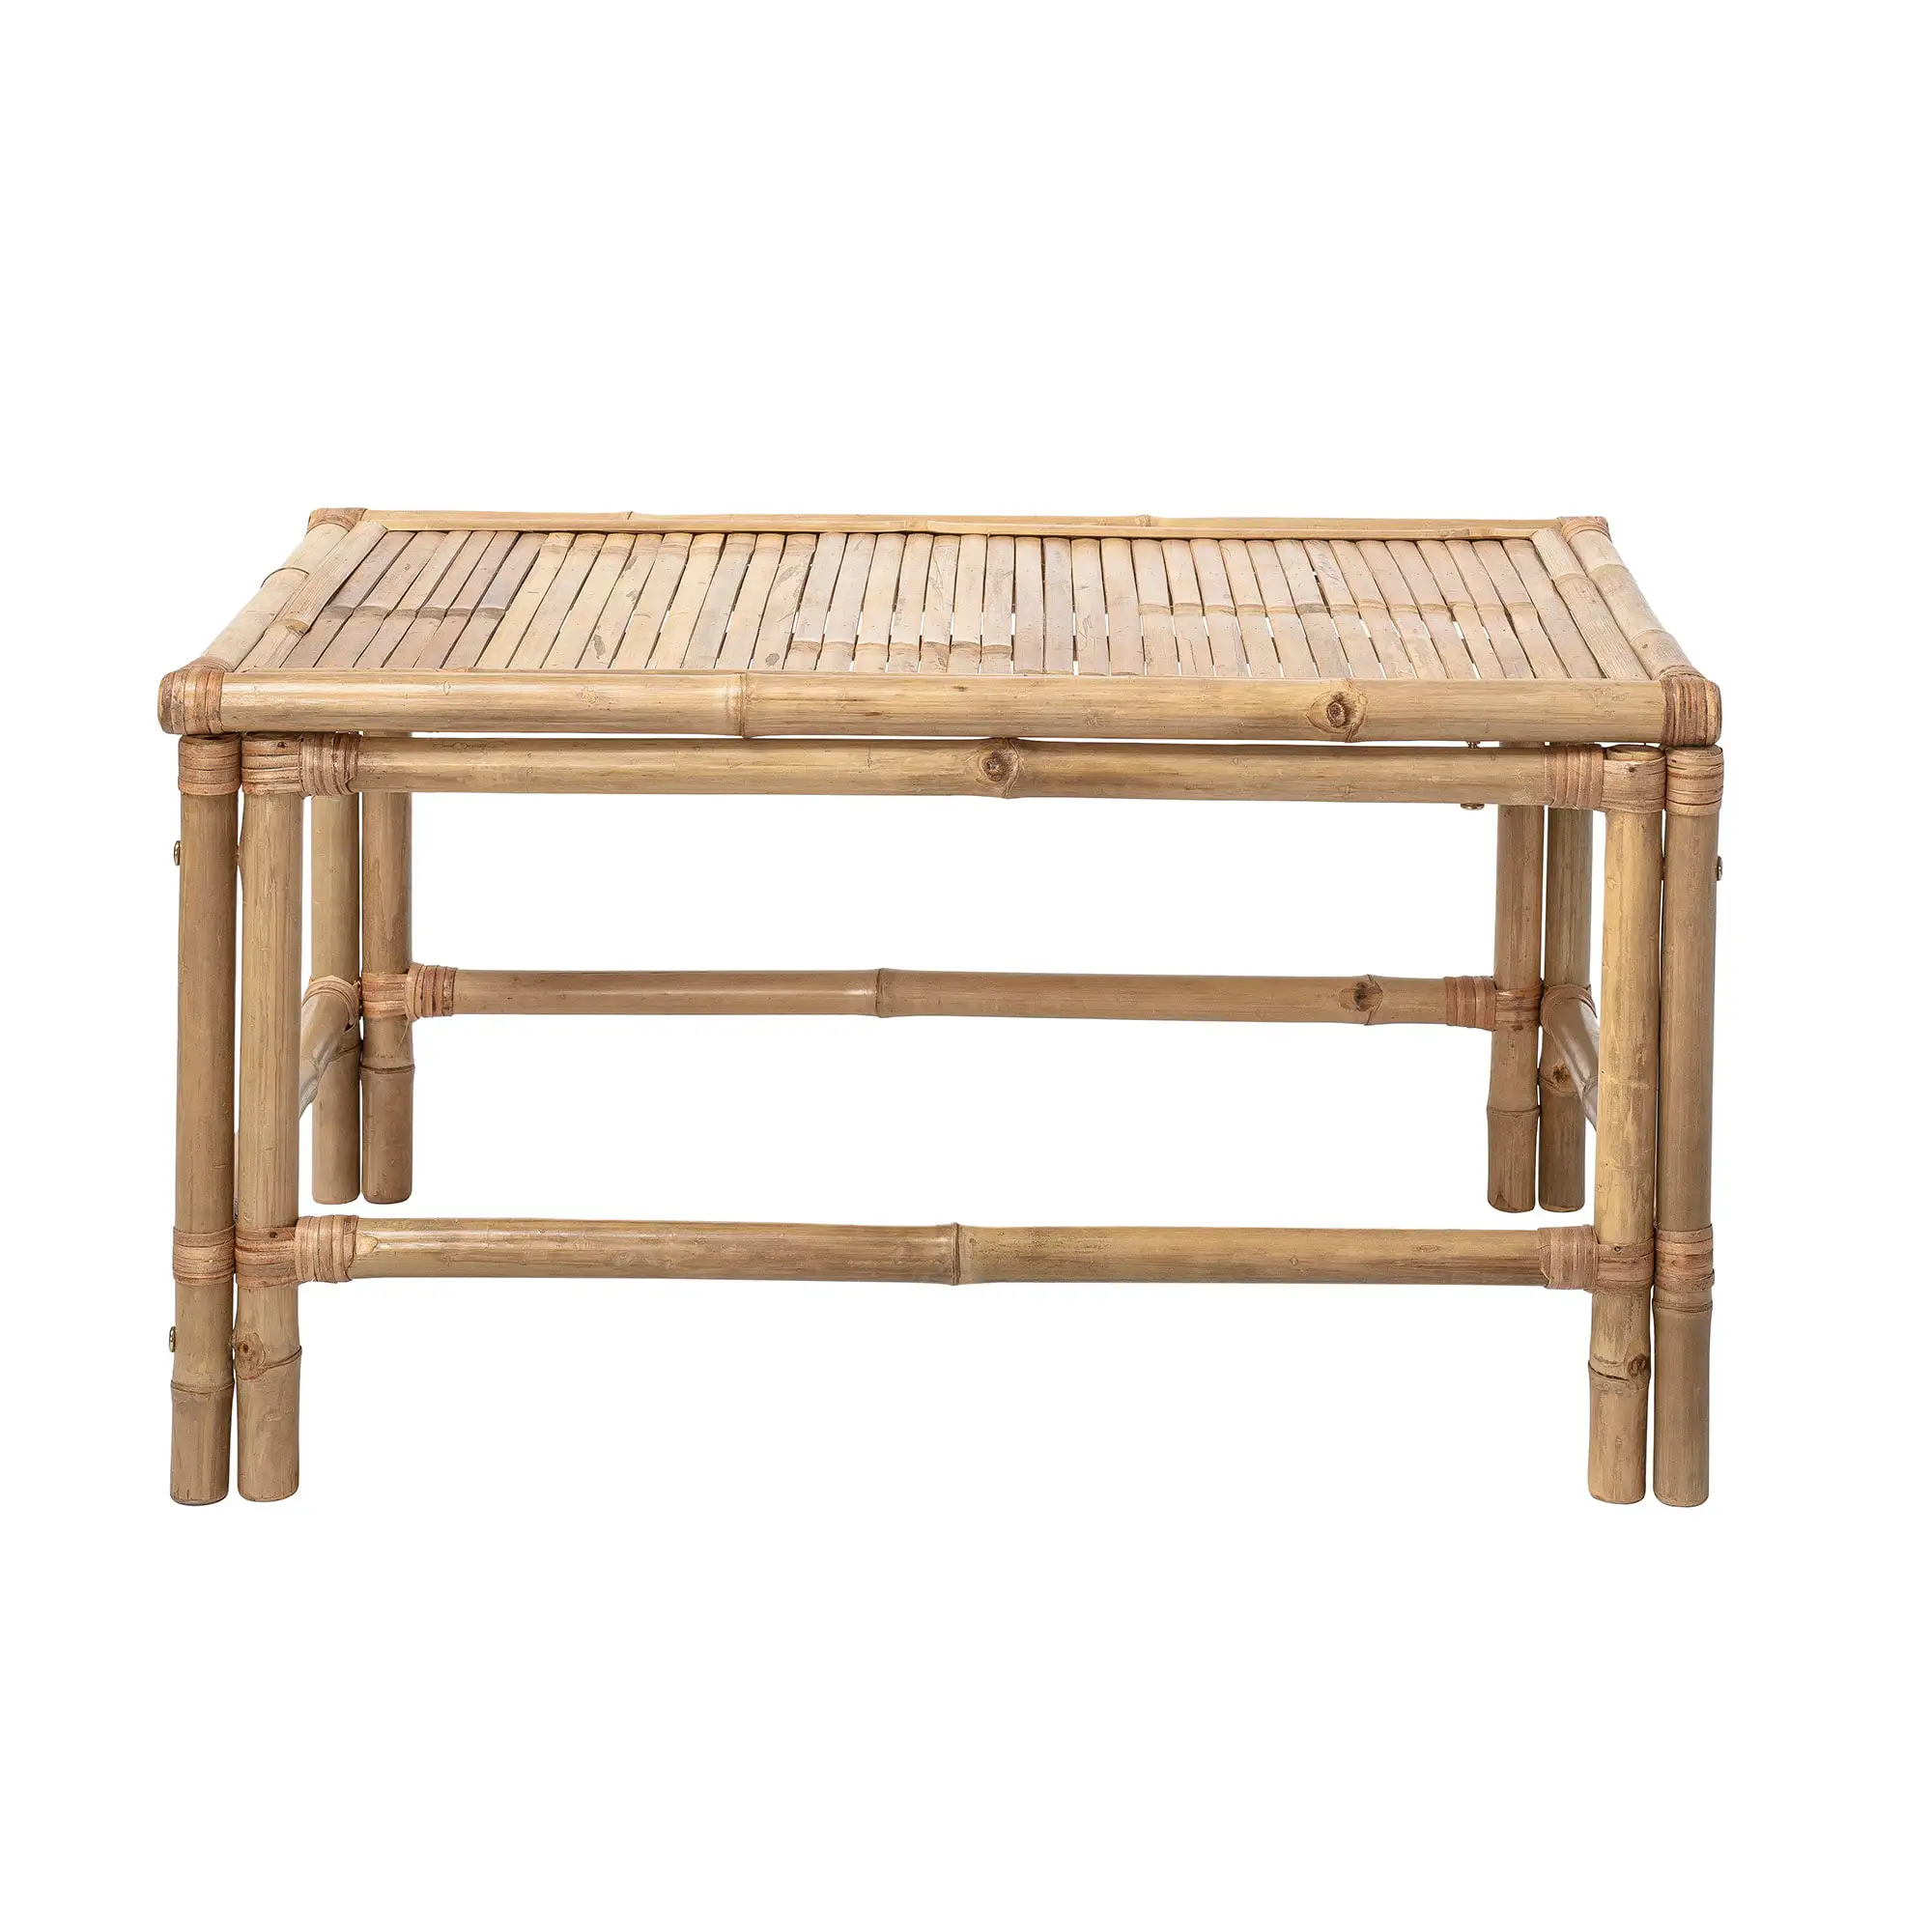 G G Concept Bamboo Furniture Bamboo Coffee Table View Bamboo